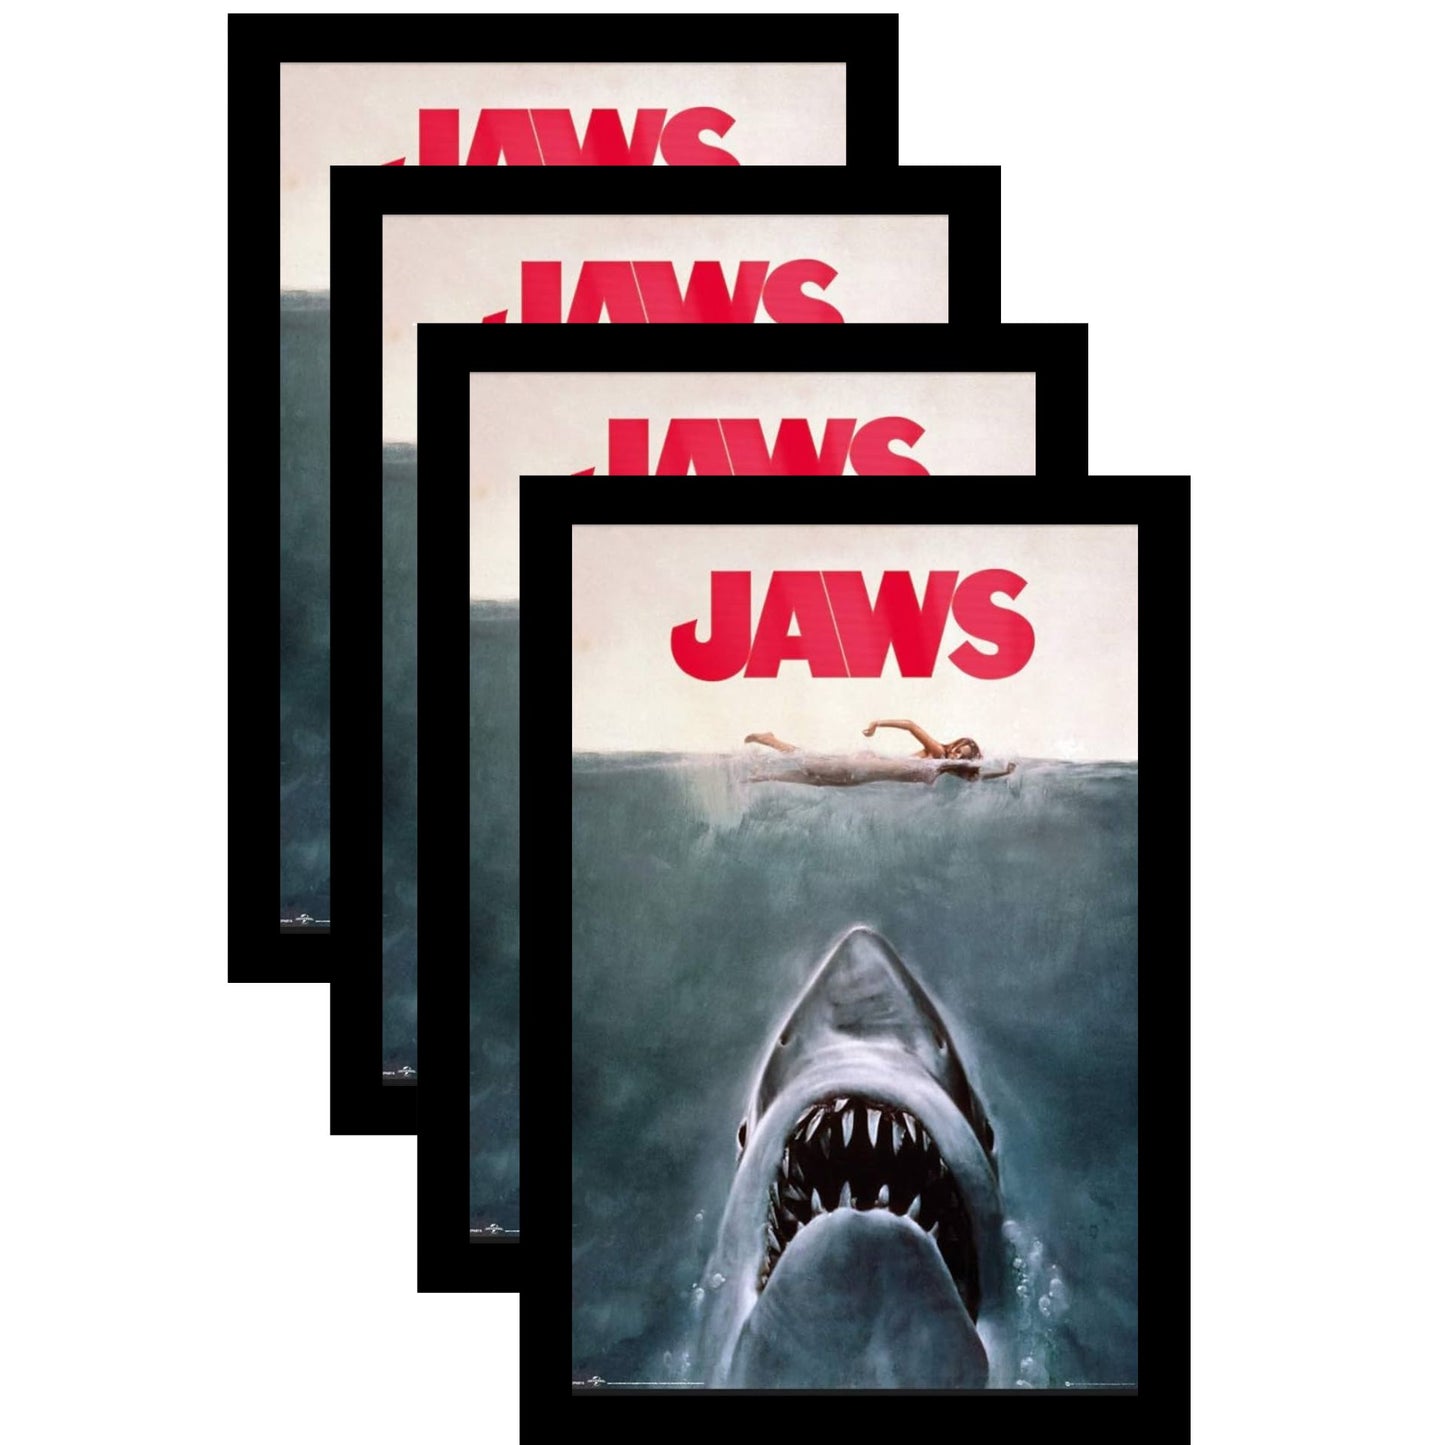 24x36 Movie Black Poster Frame Displays vertical or horizontal with installed hardware